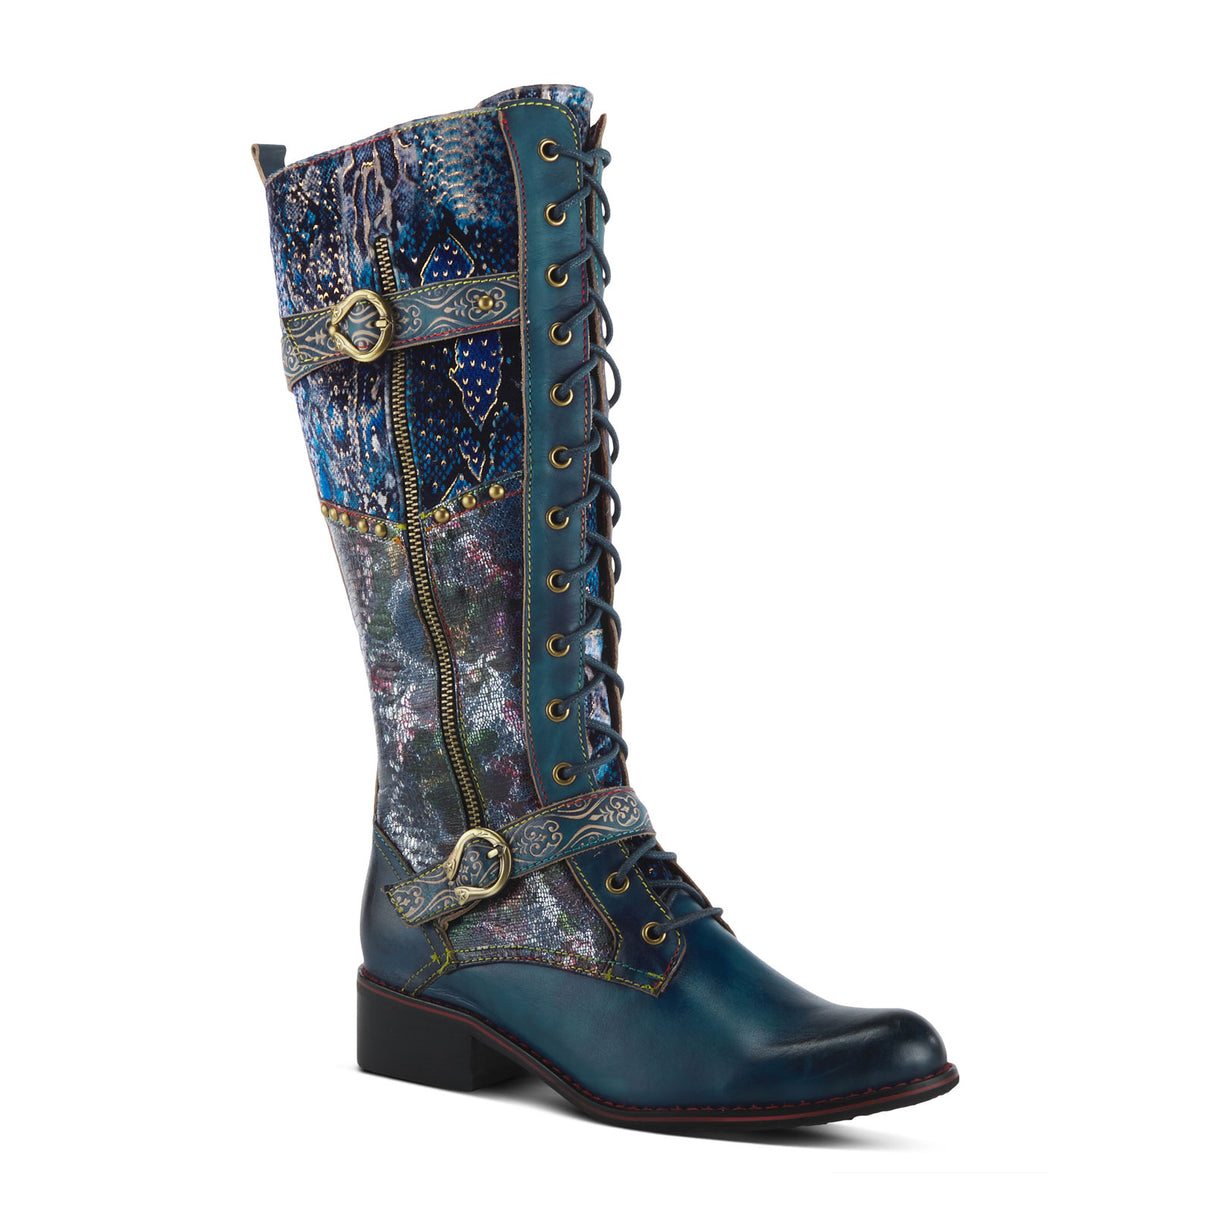 L'Artiste Vaneyck Tall Boot (Women) - Blue Multi Boots - Fashion - High - The Heel Shoe Fitters